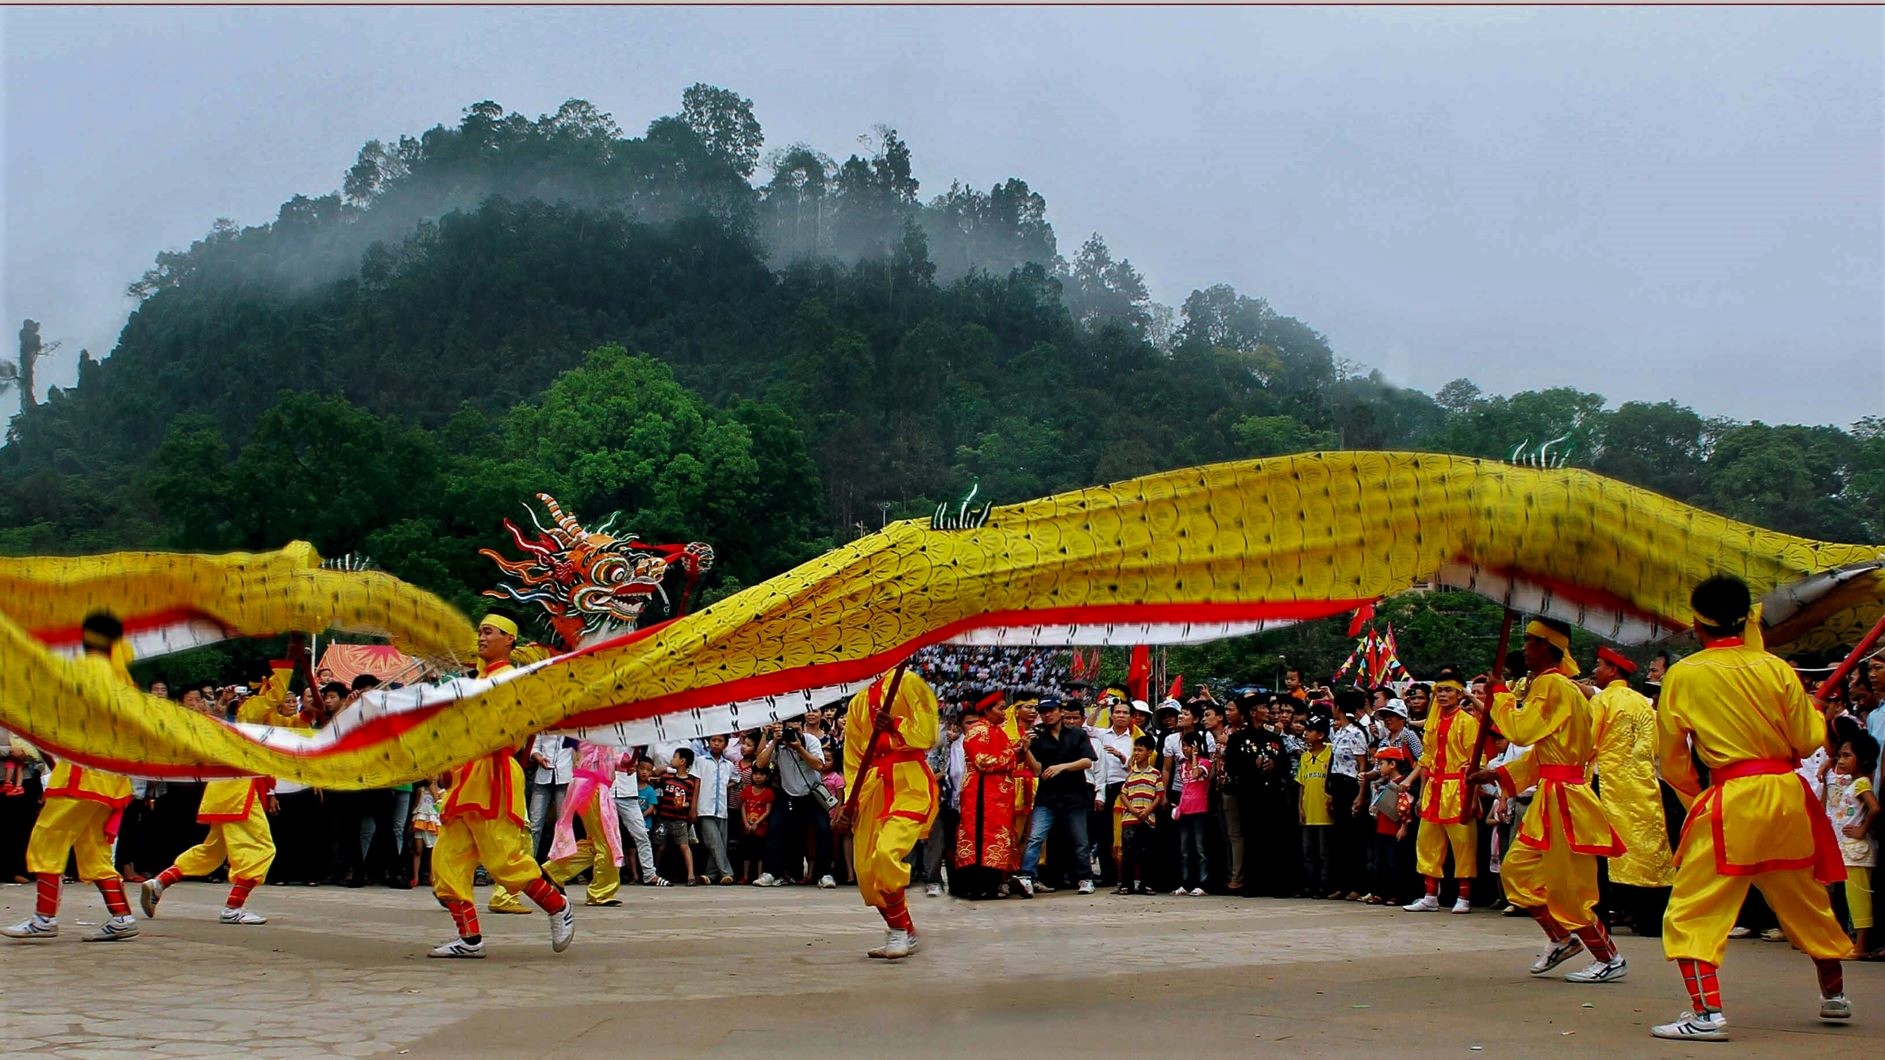 The Hung King's Temple Festival